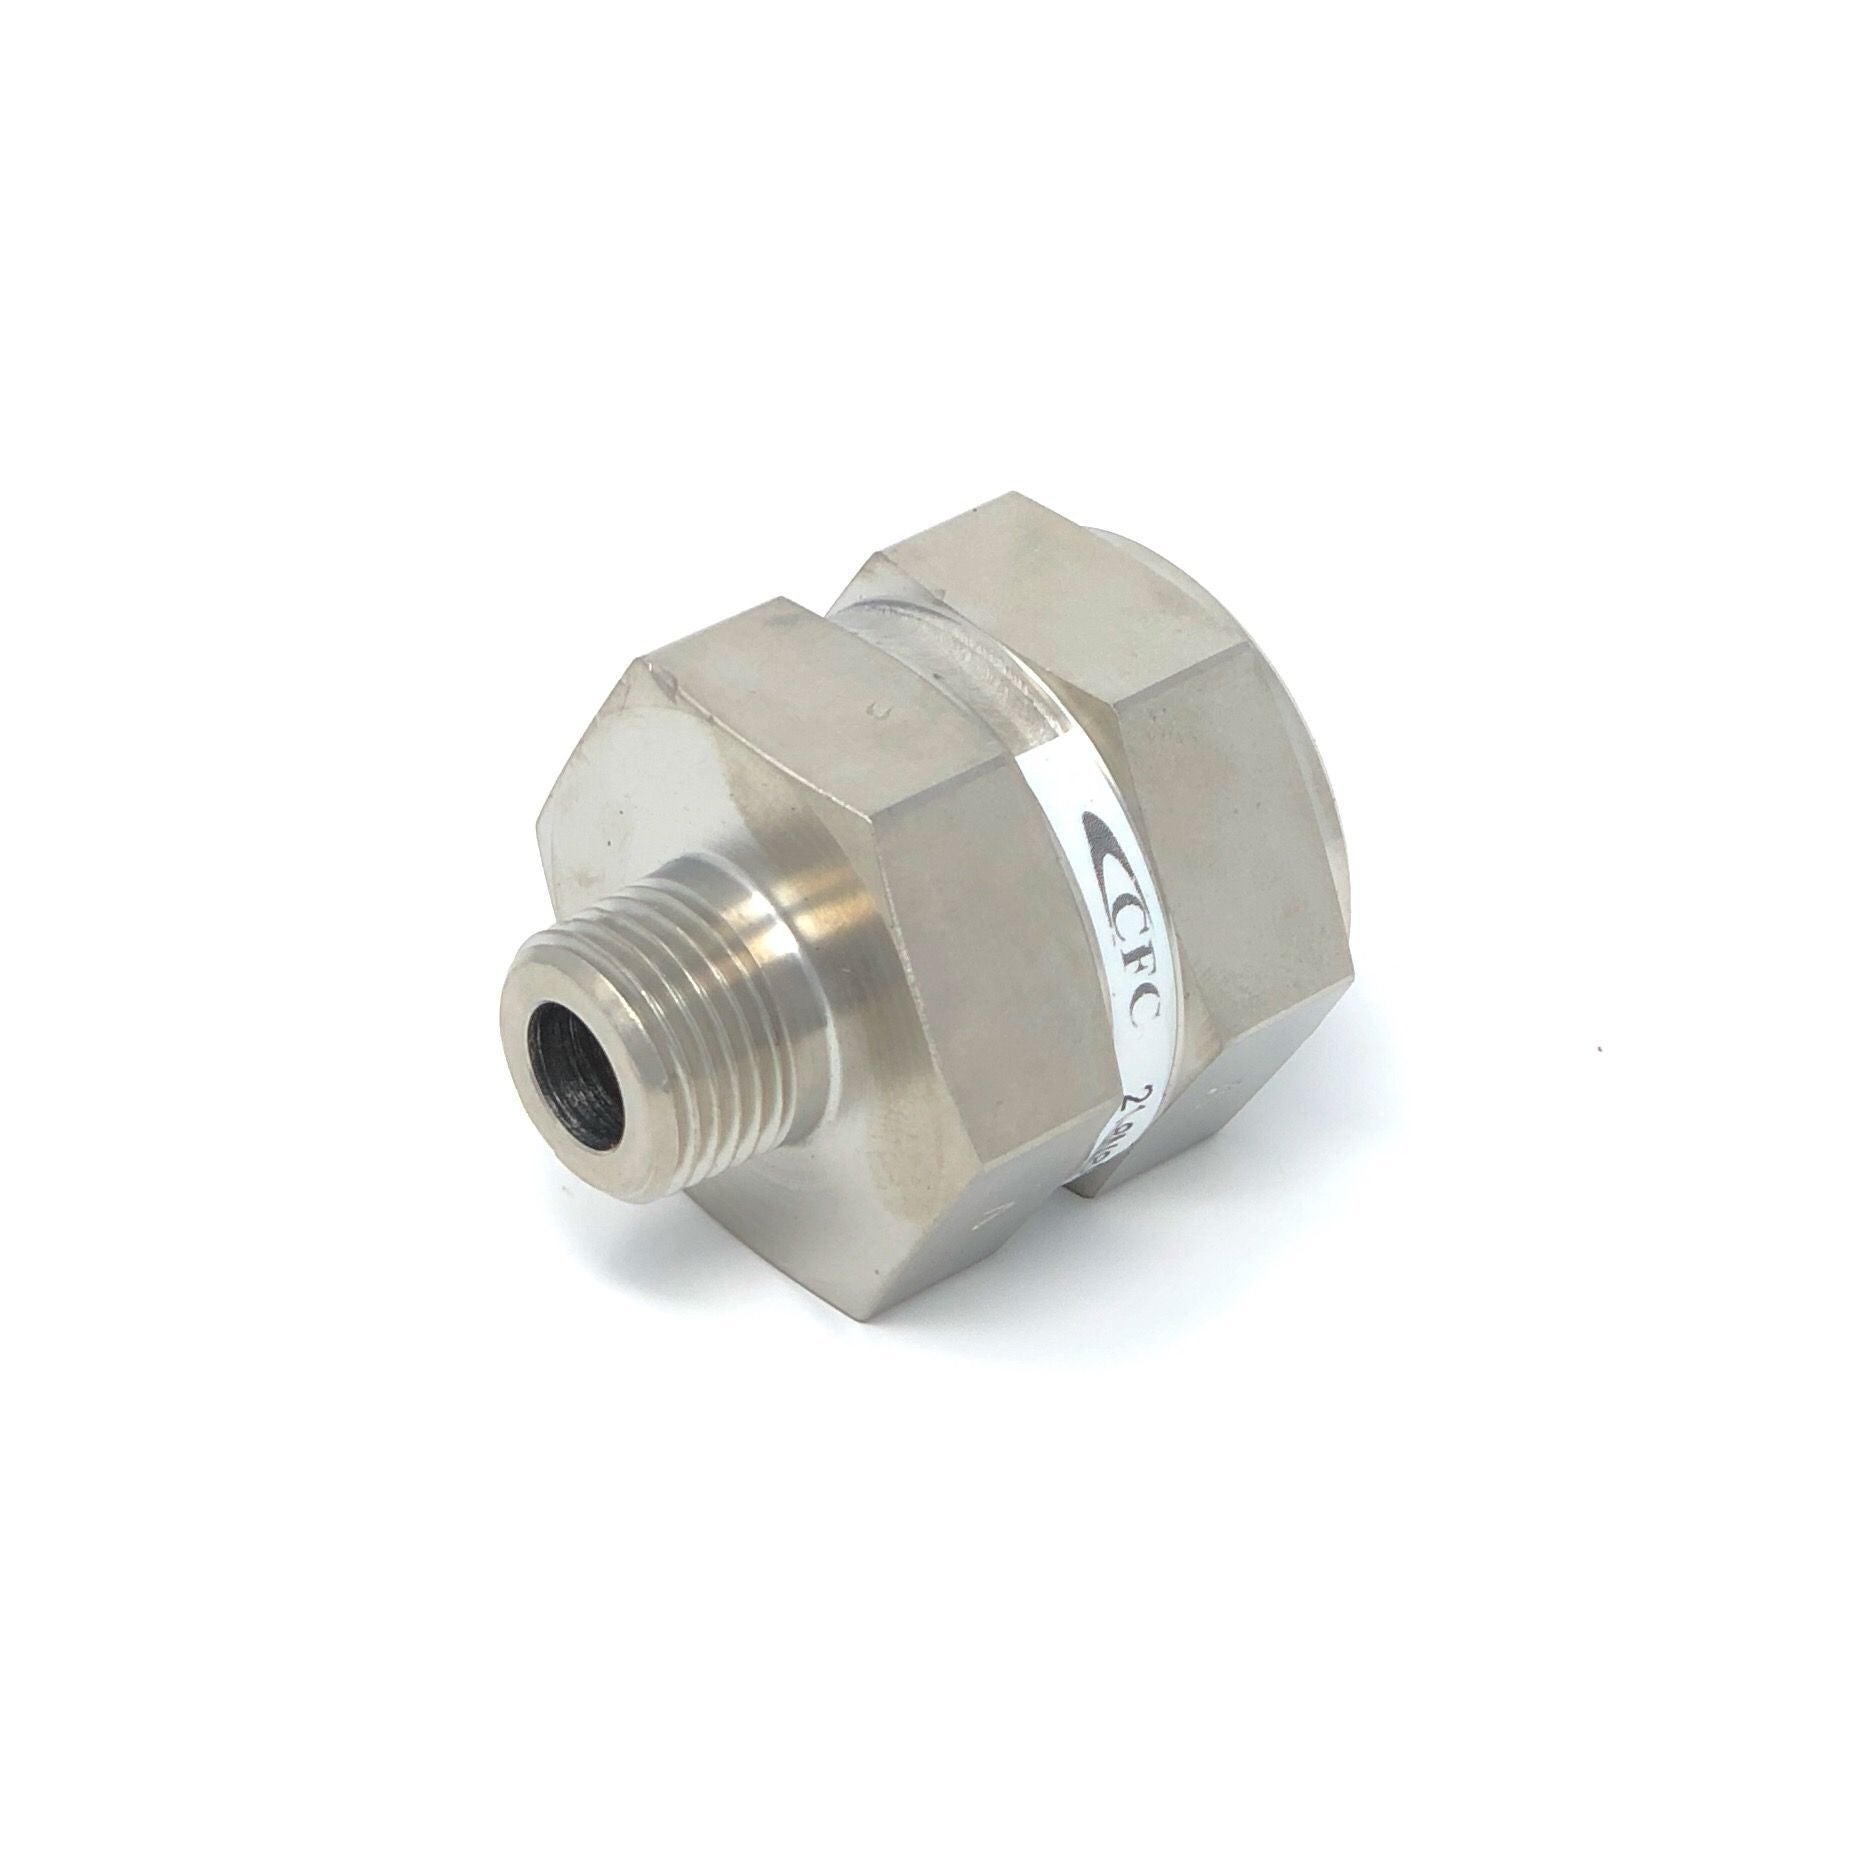 21-6P6P-10S : Chase High Pressure Inline Filter, 6000psi, 3/8" NPT, 10 Micron, No Visual Indicator, No Bypass